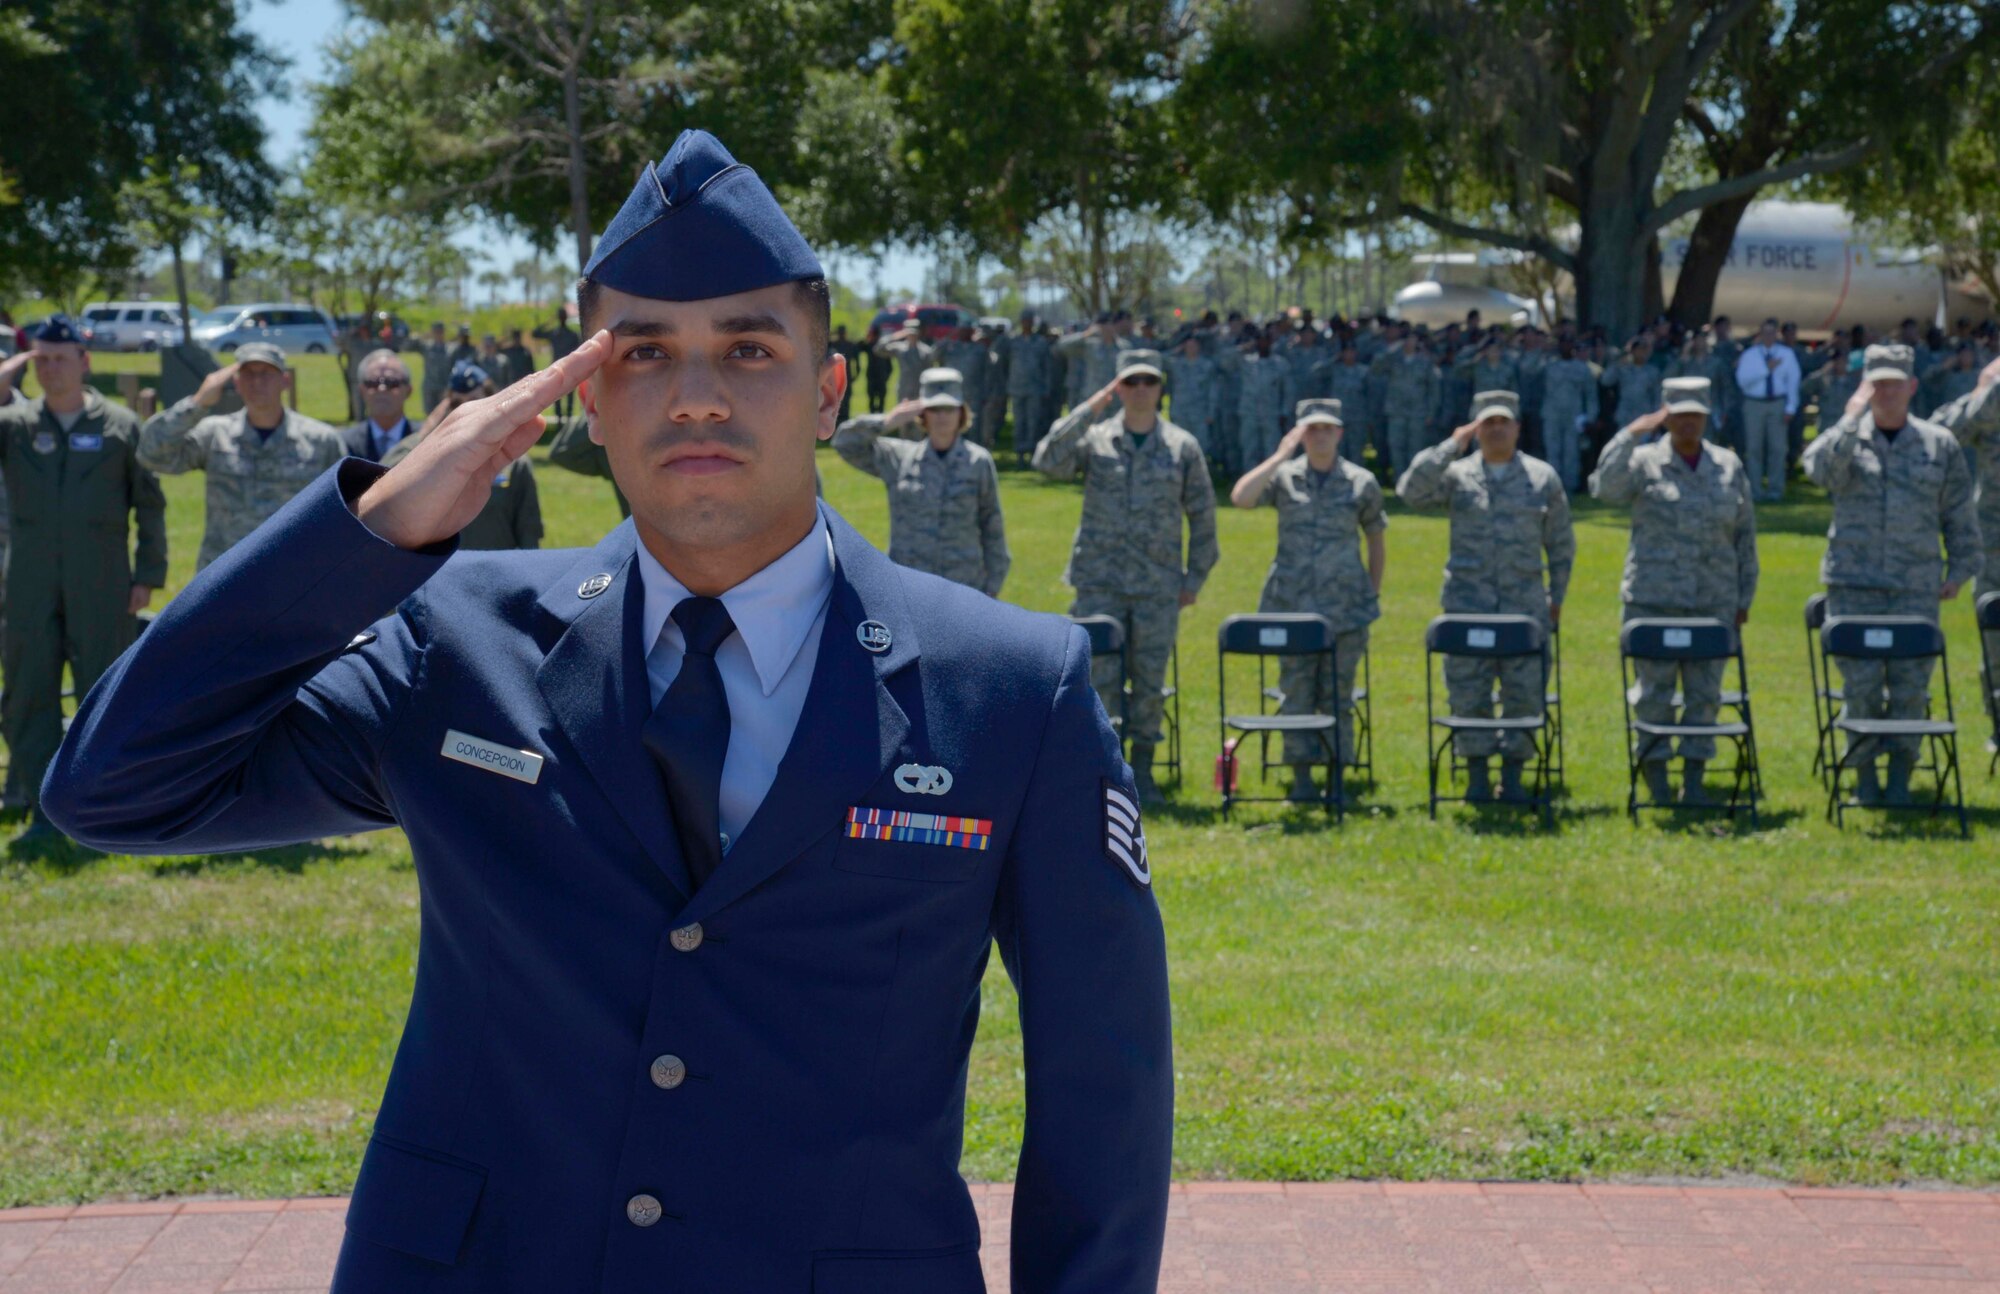 U.S. Air Force Staff Sgt. William Concepcion, a fire truck maintenance mechanic assigned to the 6th Logistics Readiness Squadron, renders a salute to the American flag during a Memorial Day ceremony at MacDill Air Force Base, Fla., May 26, 2017. Personnel and members of the community were invited to attend and pay respect to fallen heroes. (U.S. Air Force photo by Staff Sgt. Vernon L. Fowler Jr.)